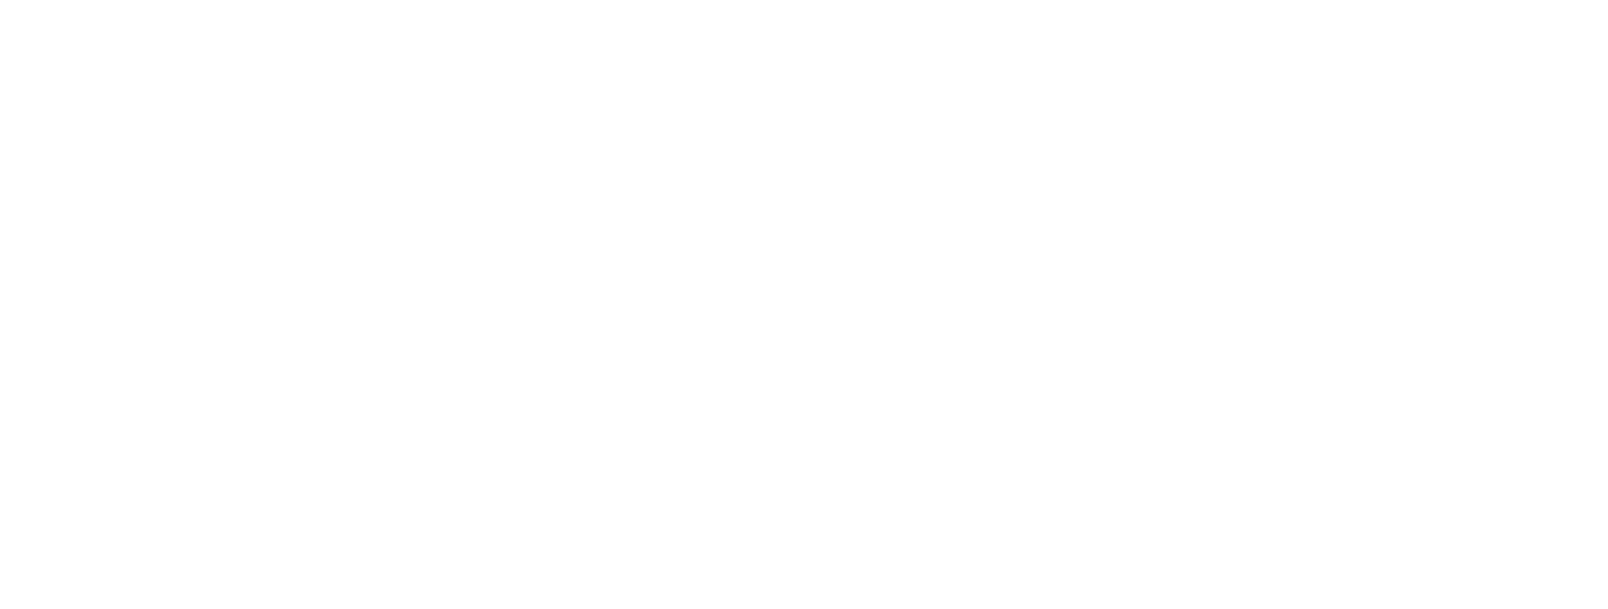 Compassion International - Releasing children from poverty in Jesus' name